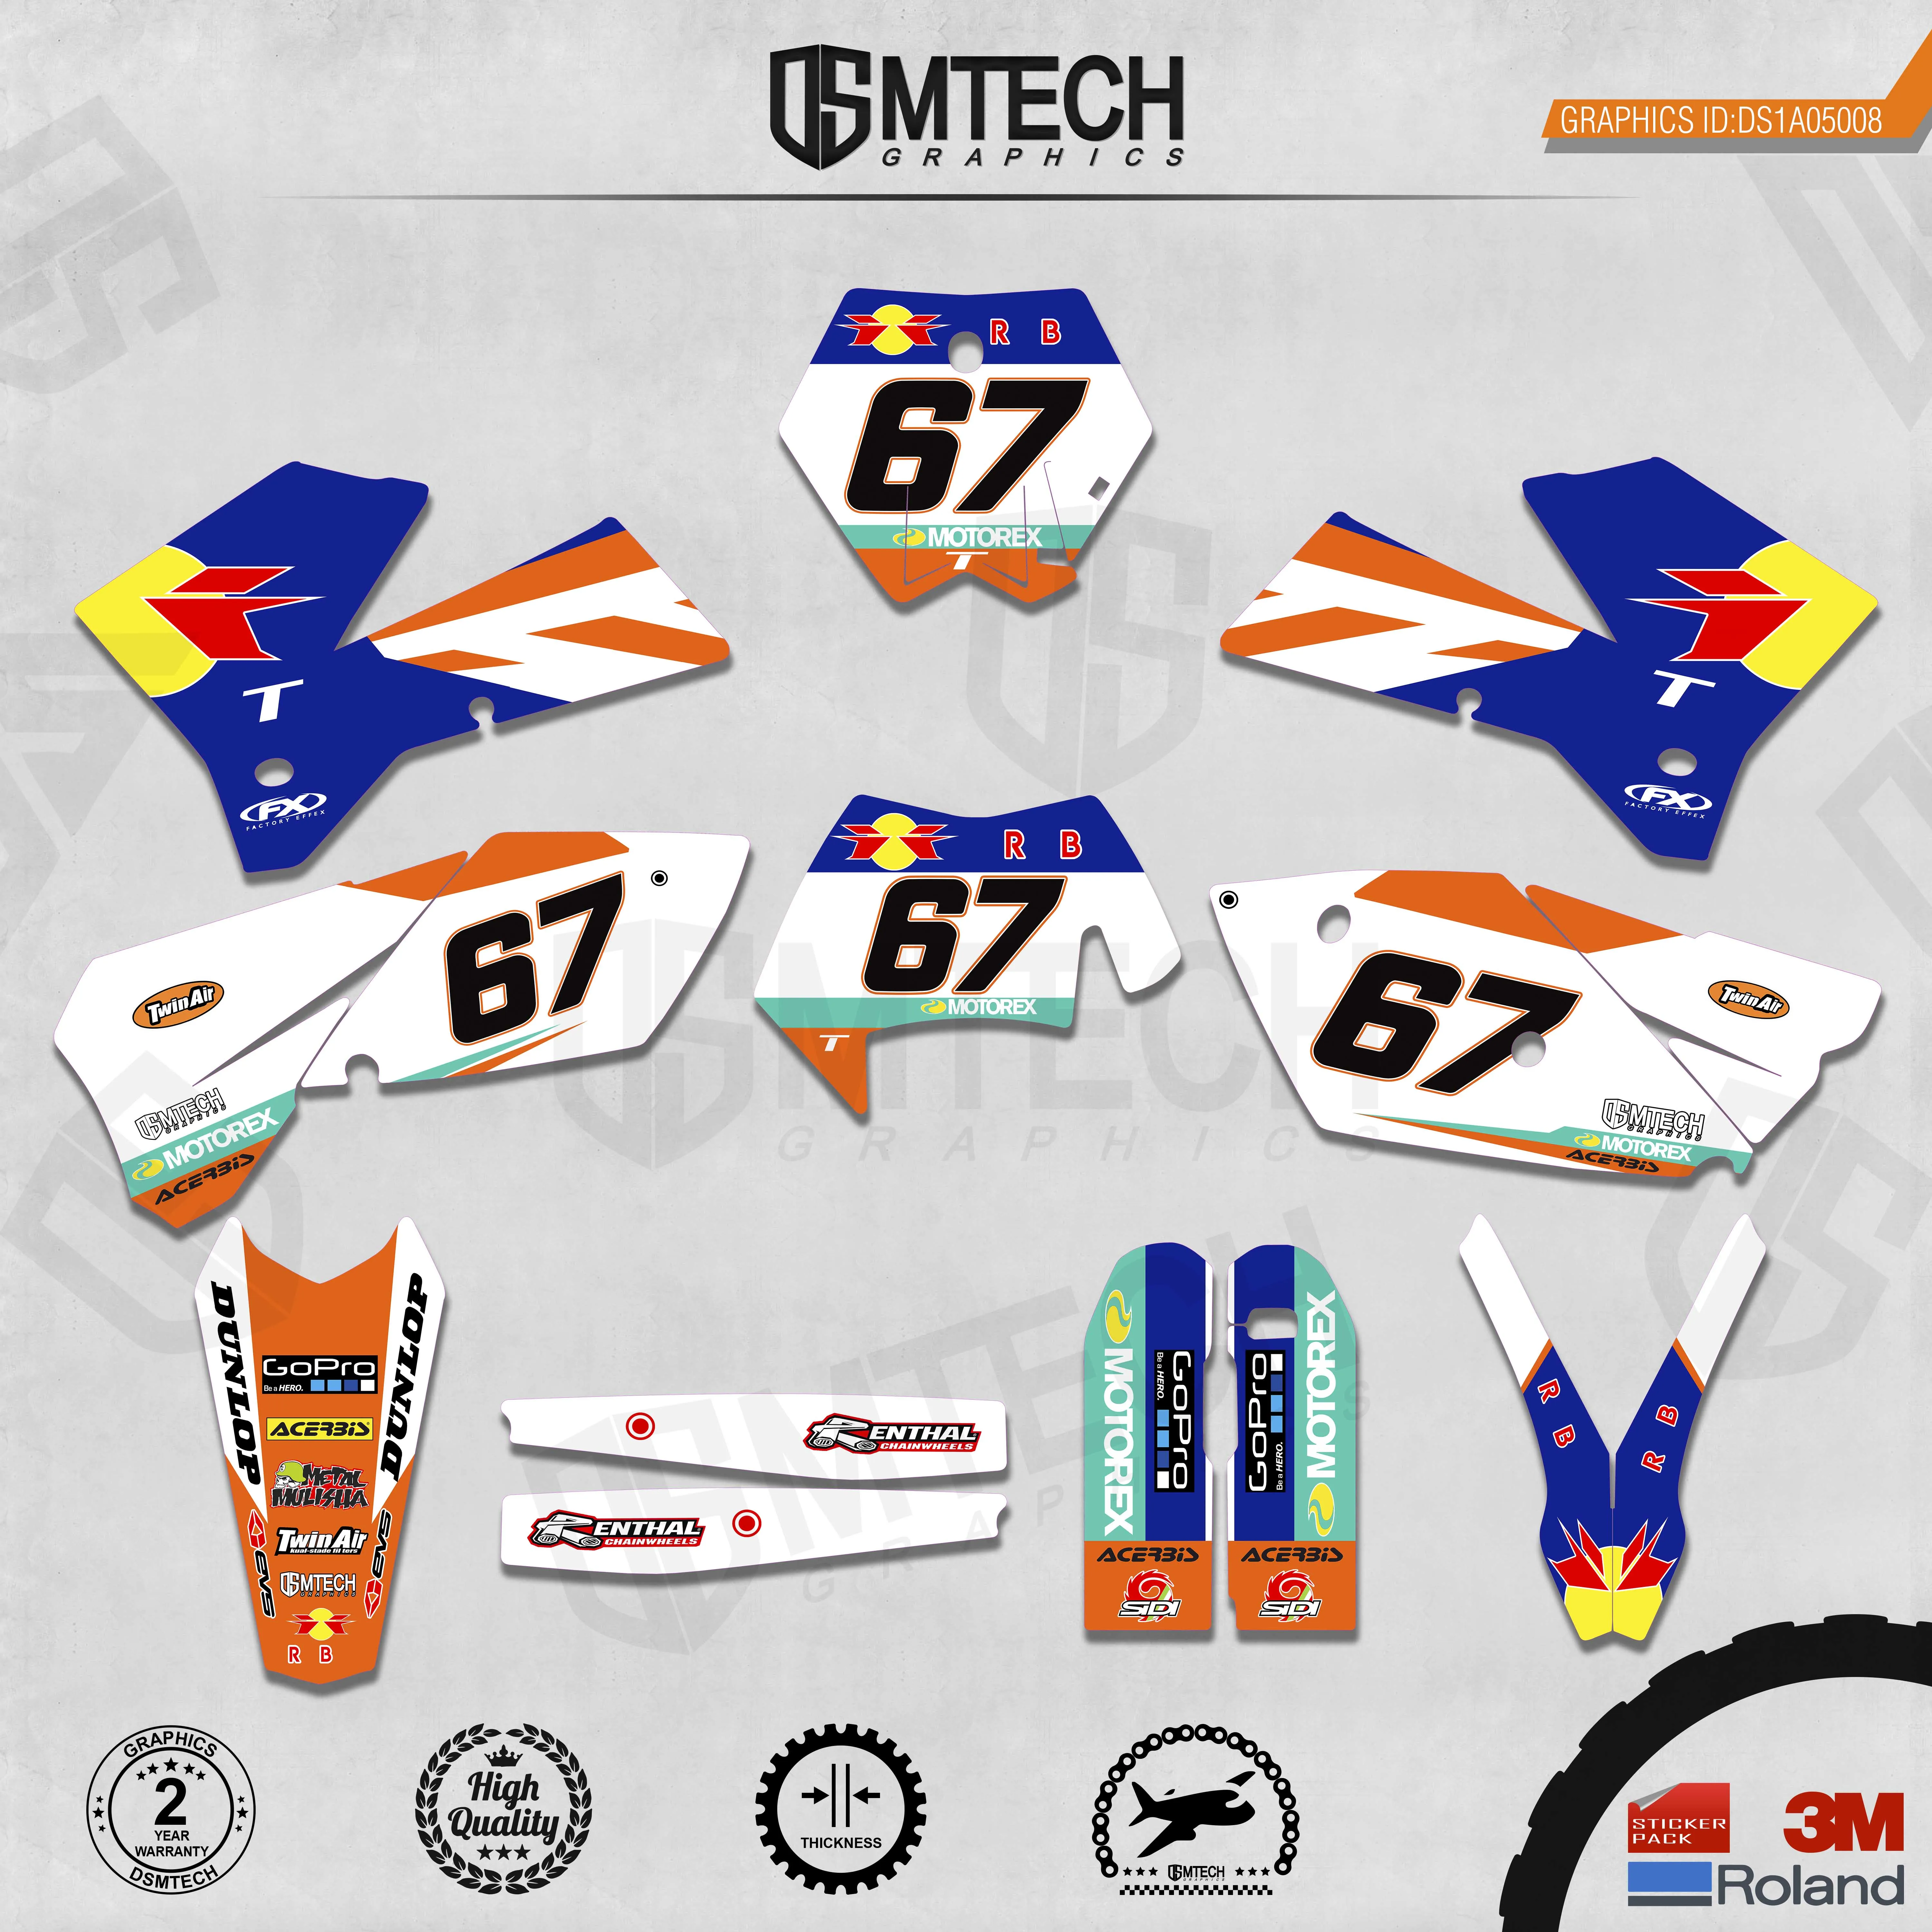 dsmtech-customized-team-graphics-backgrounds-decals-3m-custom-stickers-for-05-06sxf-06-07xcf-05-07exc-06-07xcw-008